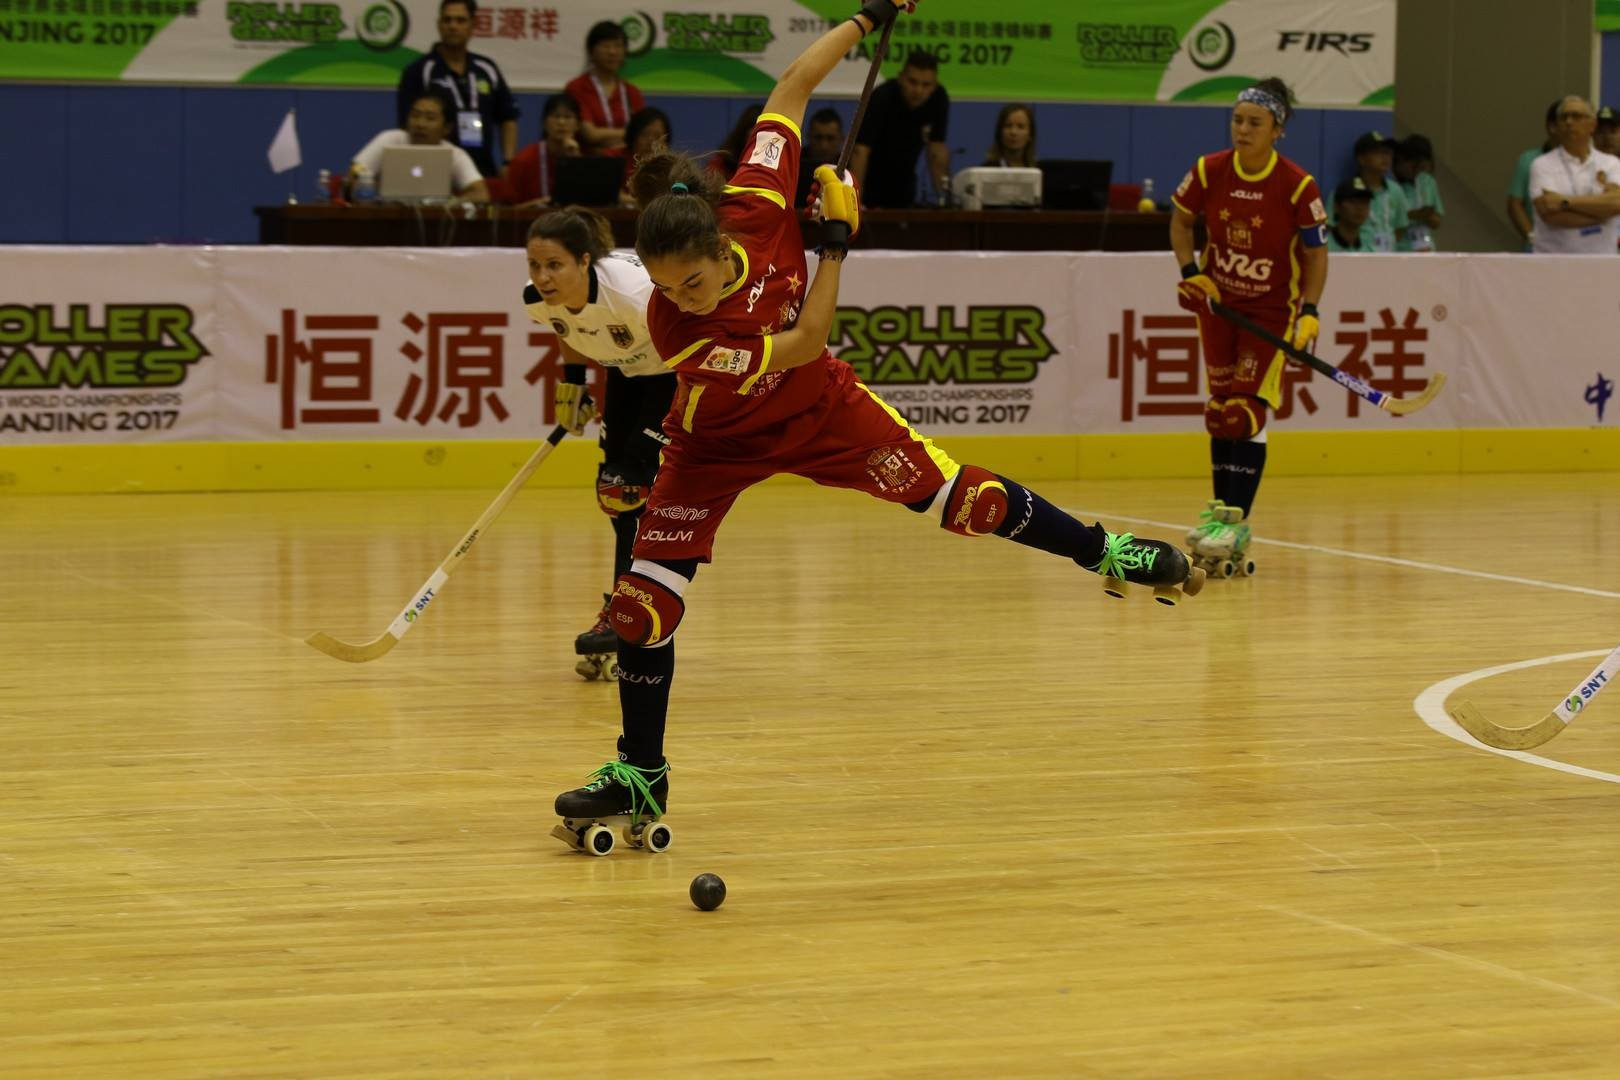 Spain qualified for the women's rink hockey final in Nanjing ©FIRS